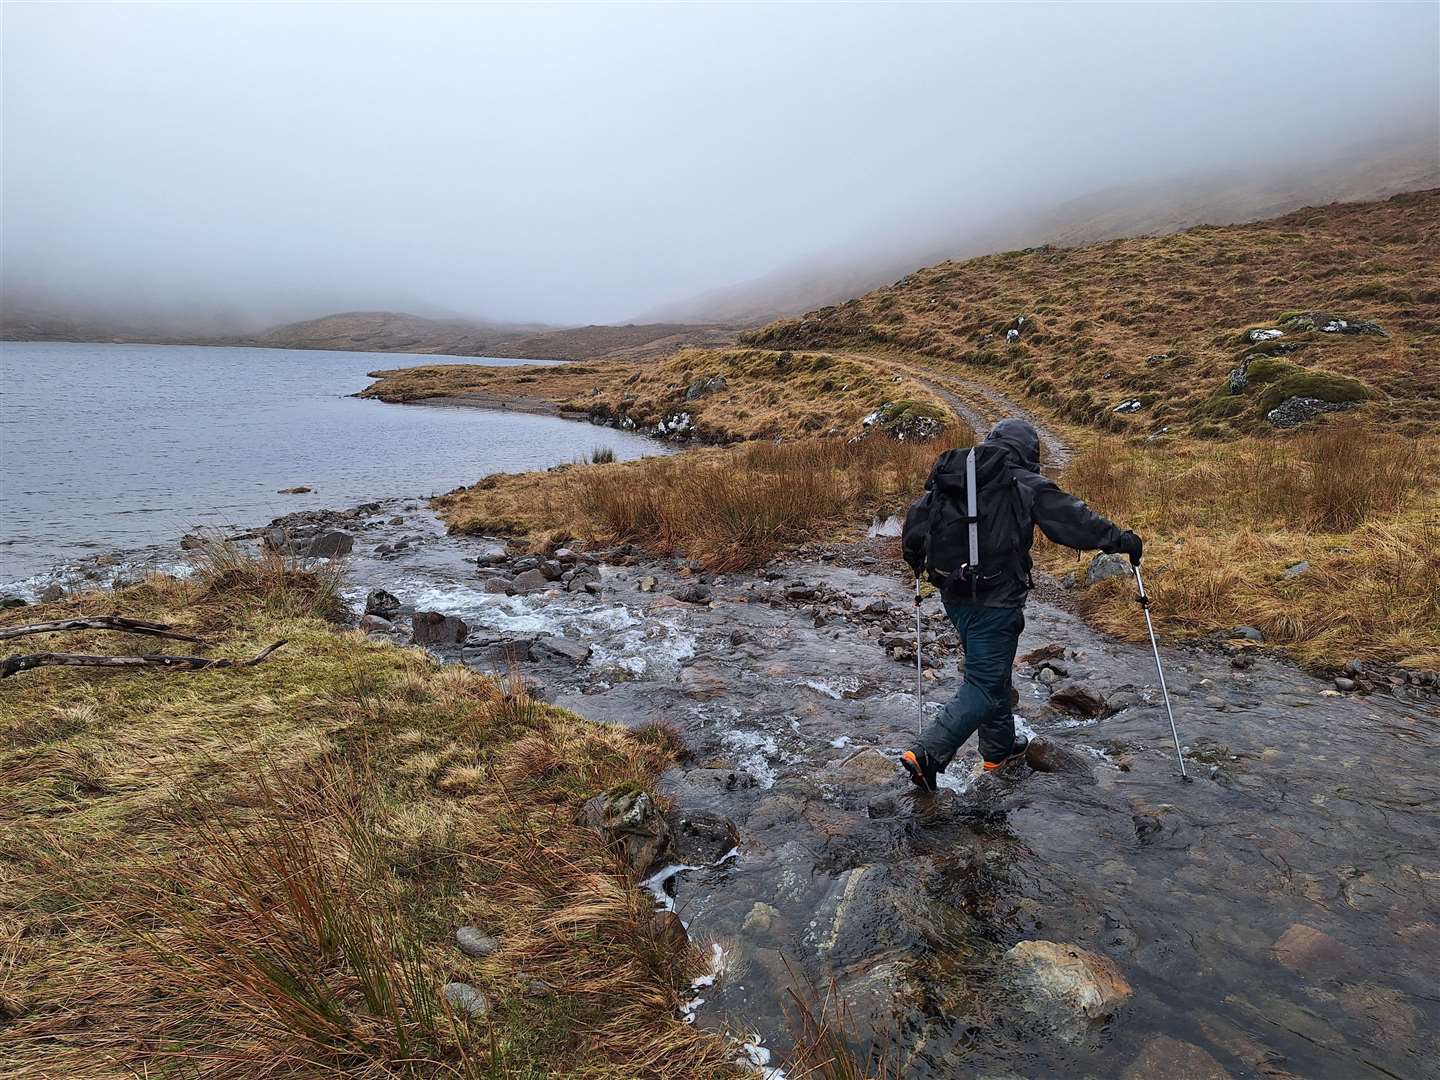 Crossing a burn on the old track along the north shore of Loch Calavie.